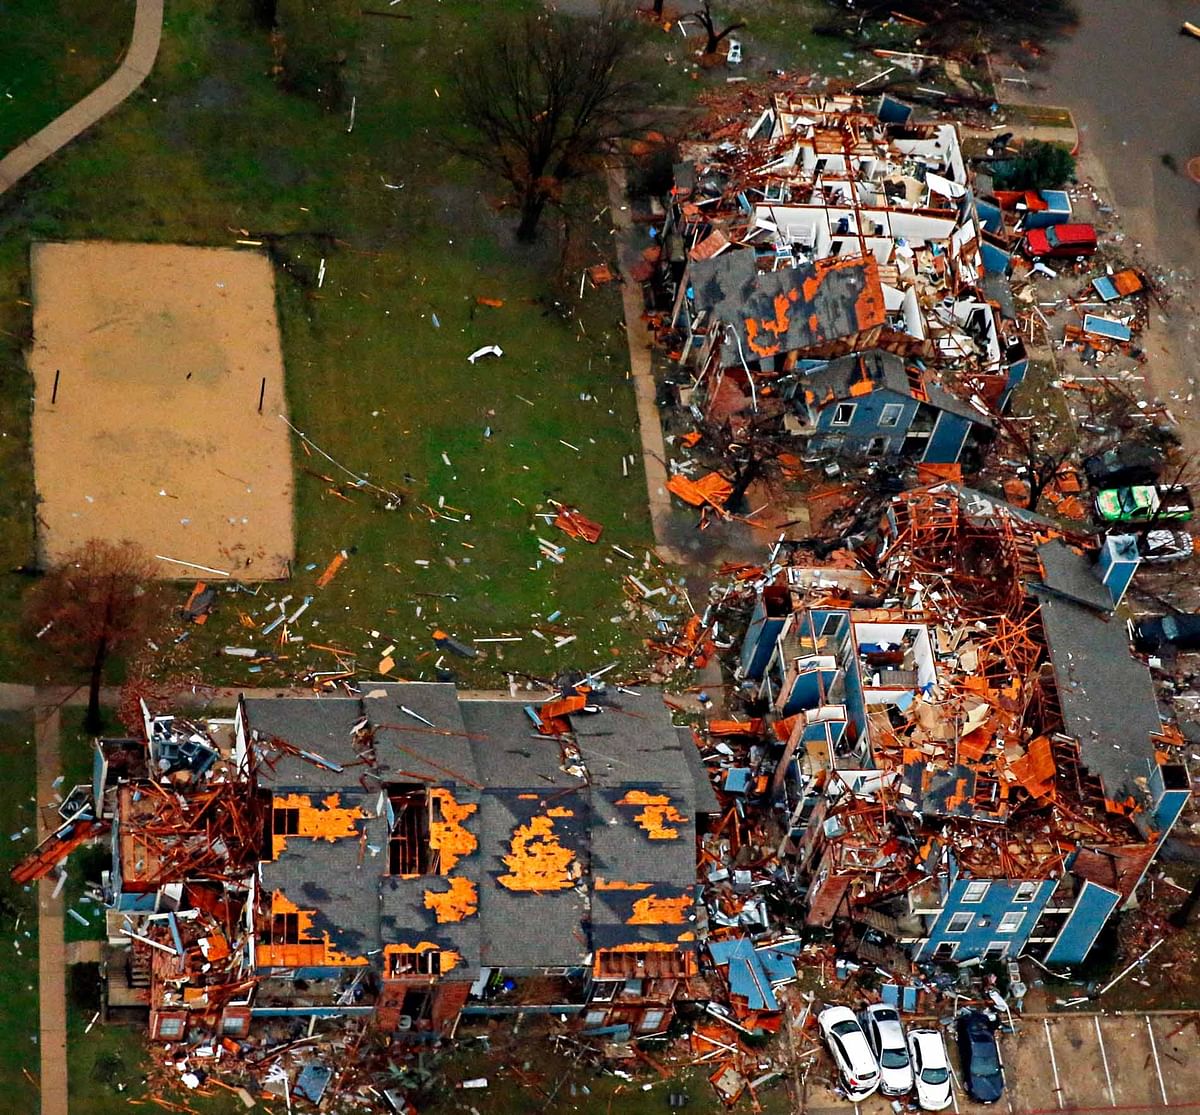 At least 11 people died and dozens were injured in apparently strong tornadoes that swept through southern USA. 